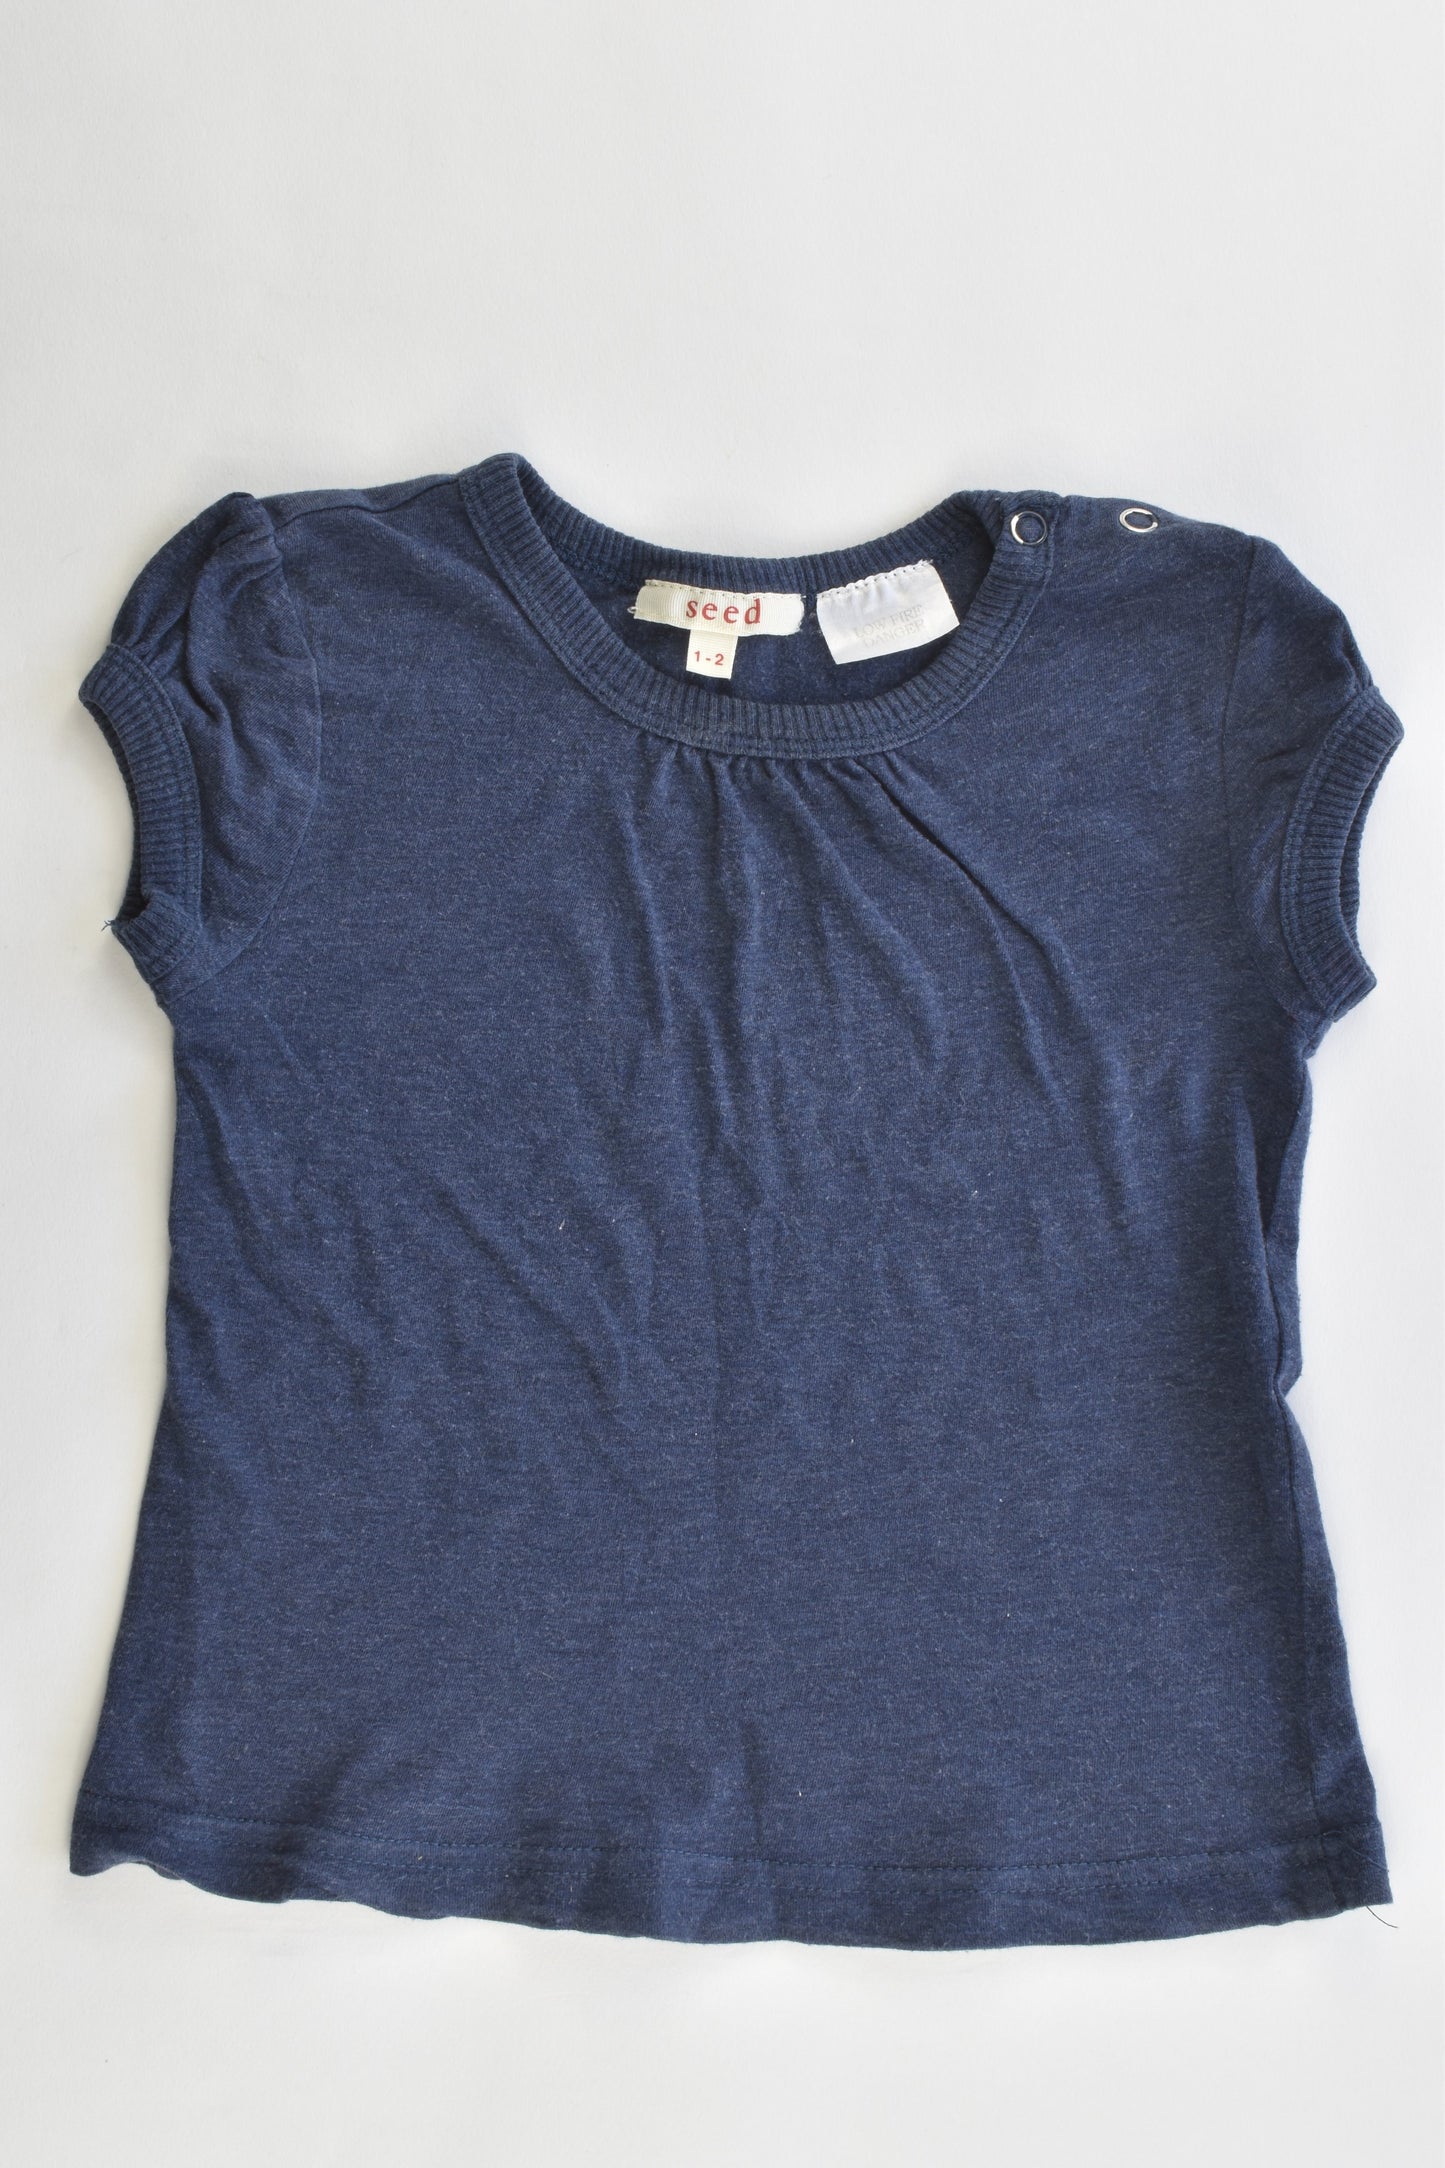 Seed Size 1-2 T-shirt